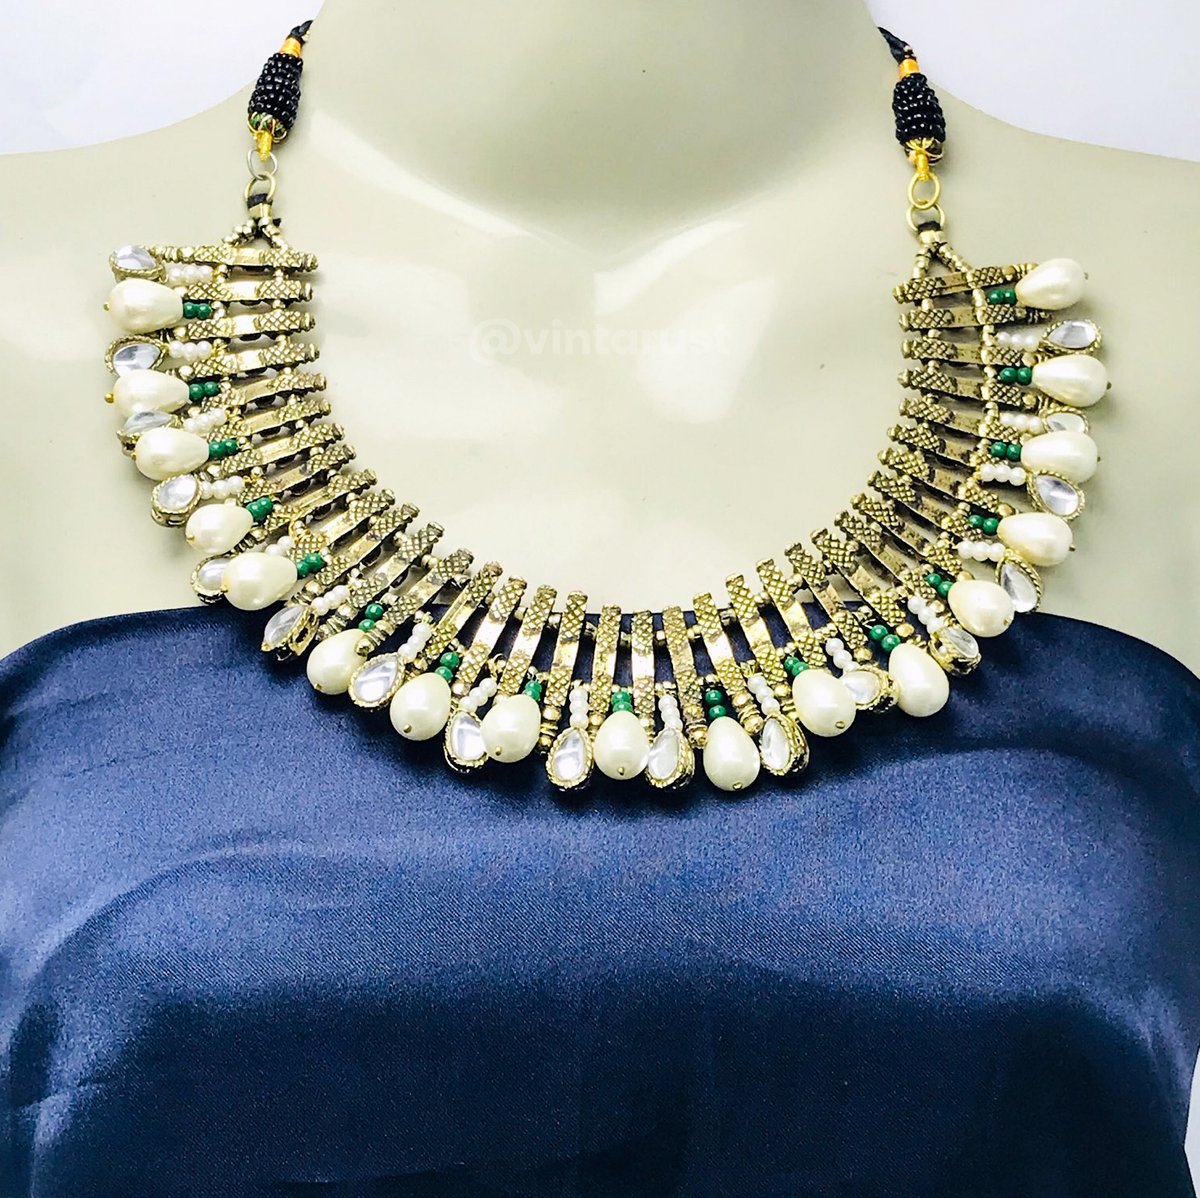 Handmade Tribal Metal Choker Necklace with Pearls. 

Sale Price: $60.00

Shop Now:
buff.ly/458rw3s

#jewelry #handmadejewelry #customjewelry #vintagejewelry #handmade #pearls #pearljewelry #jewelrydesign #diamonds #necklace #pearljewellery #jewelrylover #jewerlyblogger